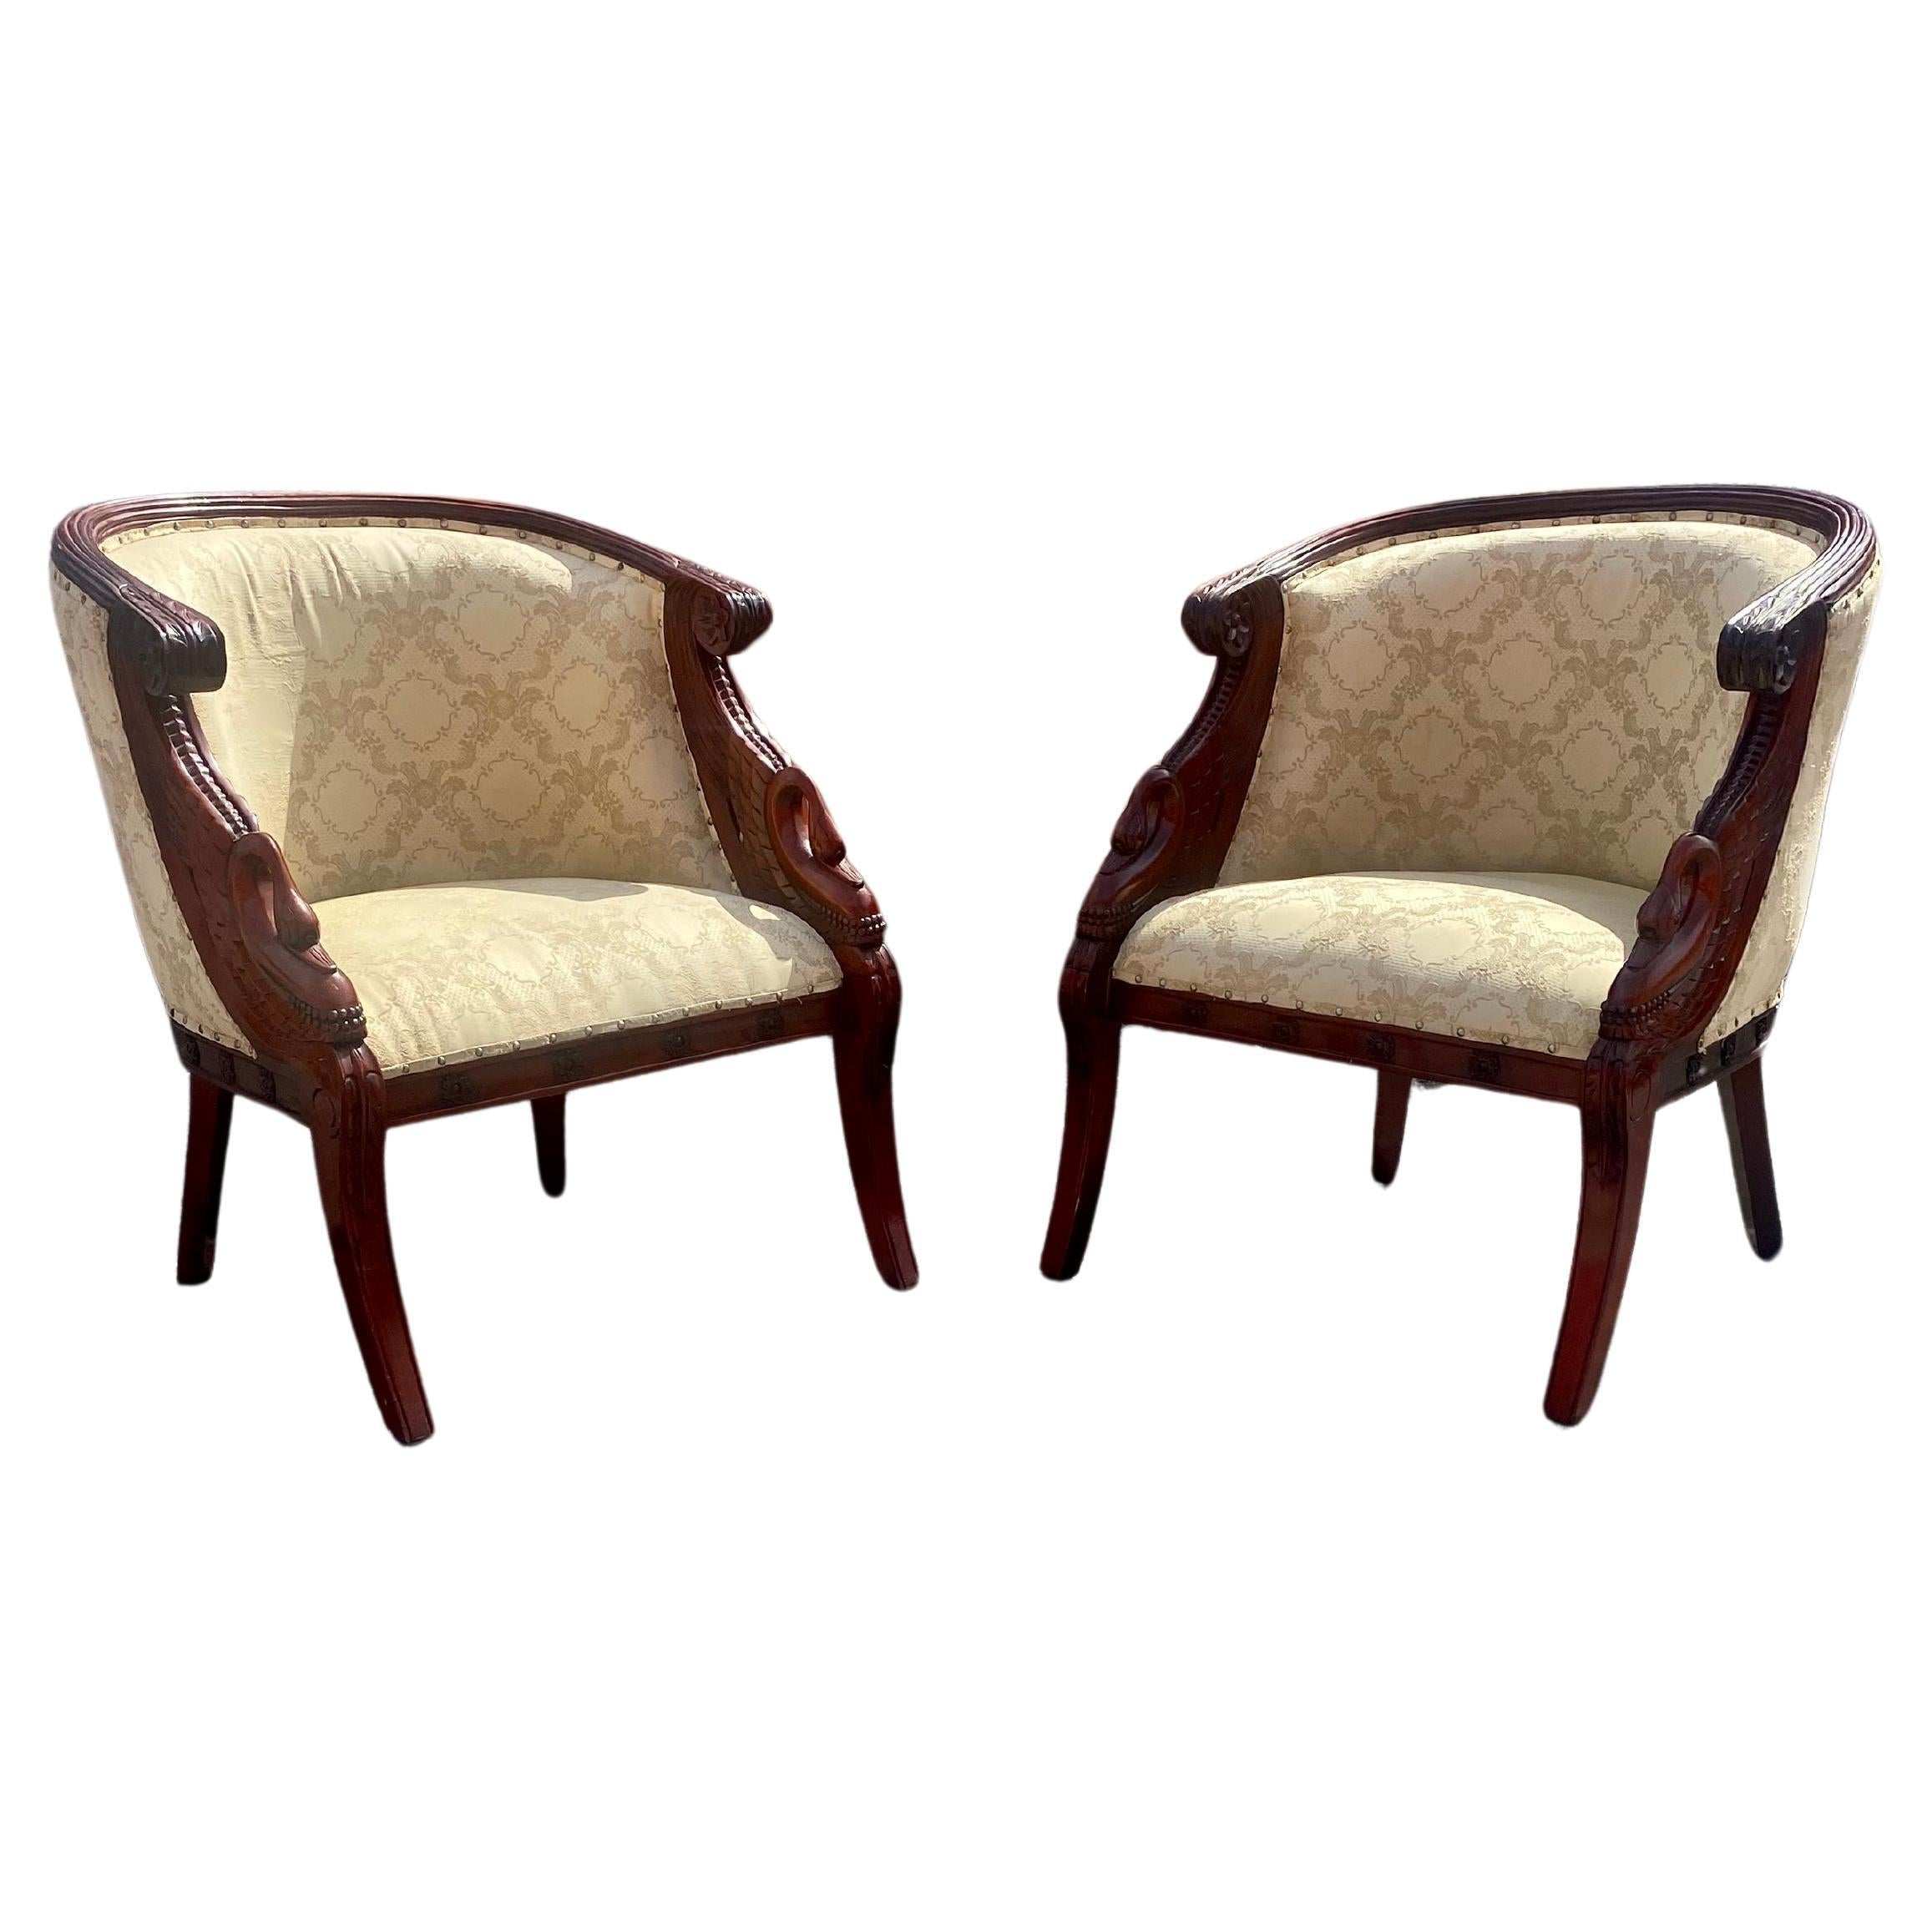 1940s Carved Gilt Wood Swan Barrel Chairs, Set of 2 For Sale